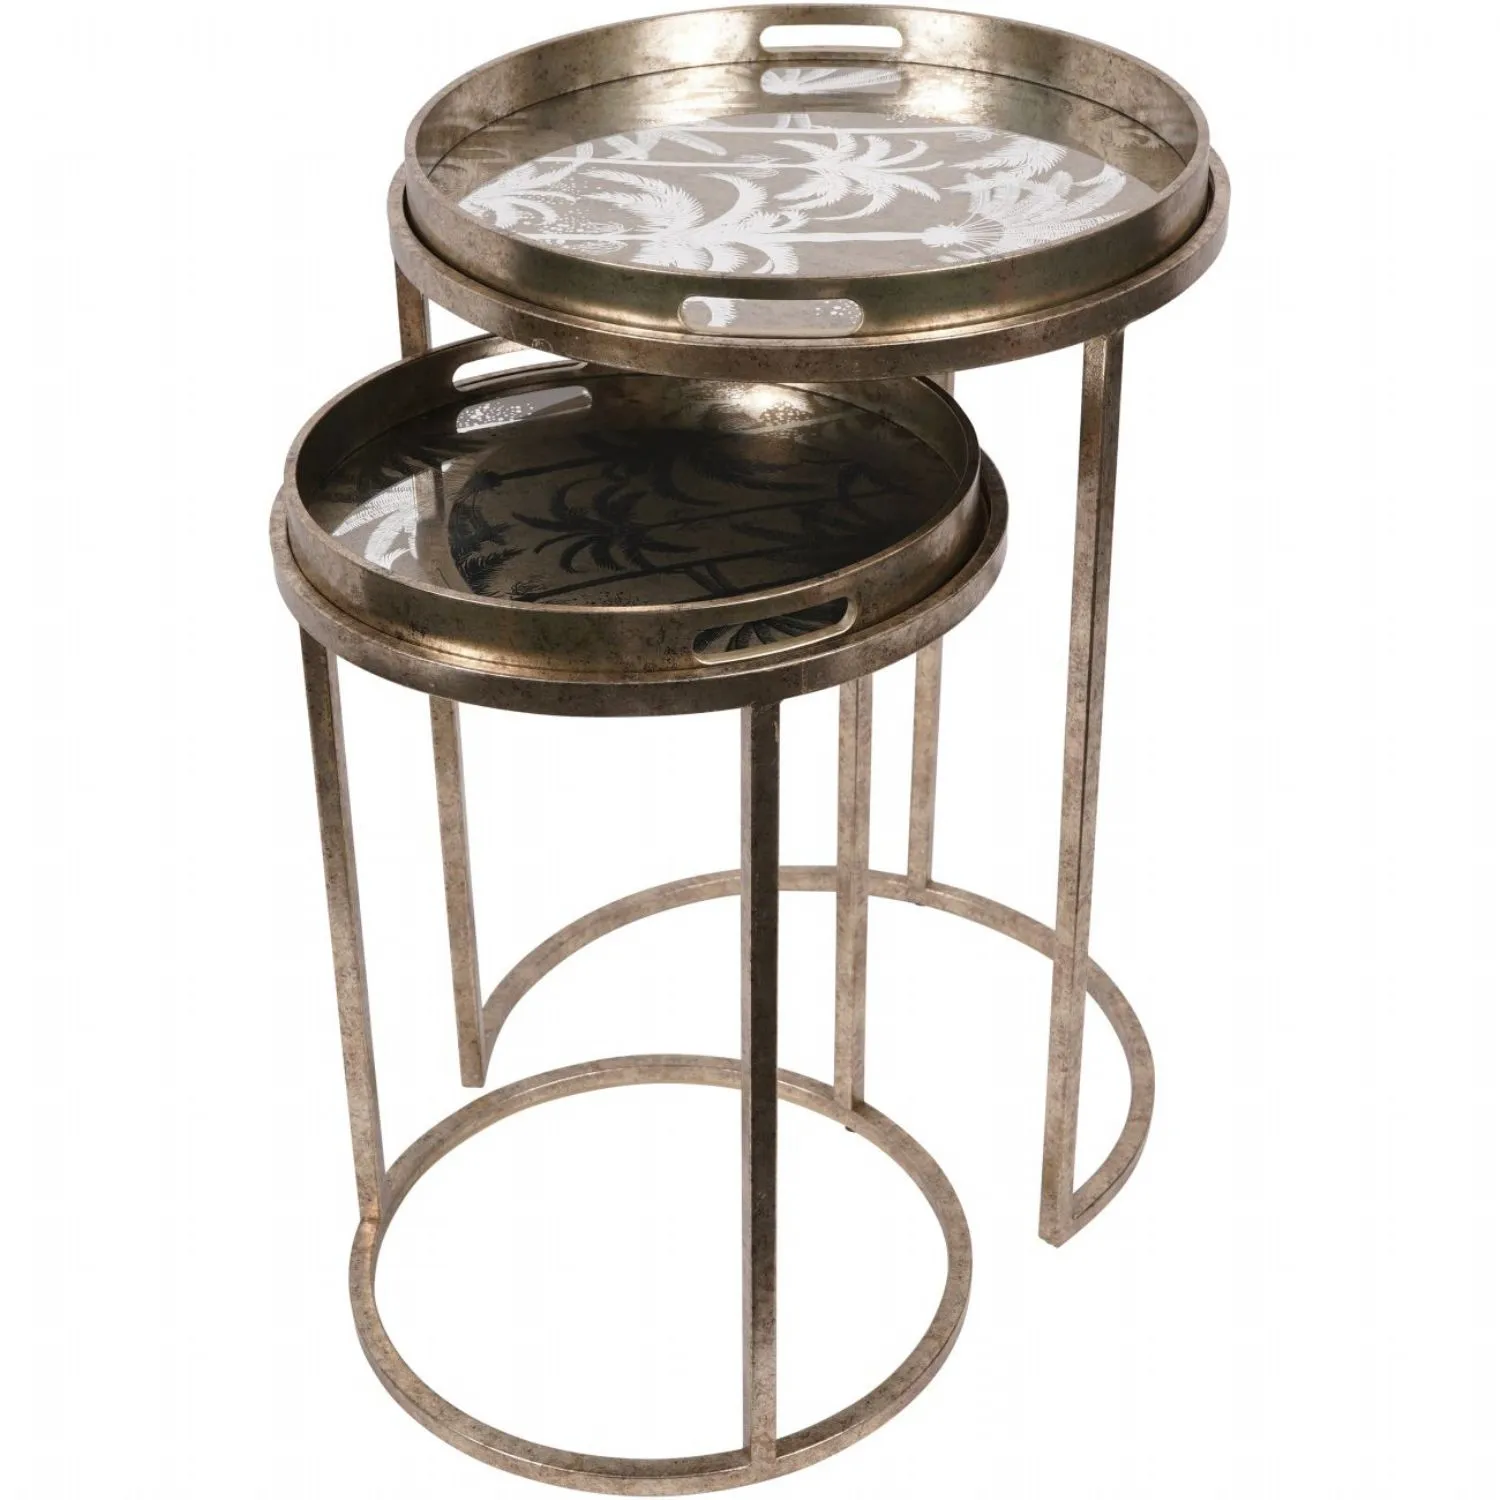 Mirrored Gold Set of Palm Tree Round Nesting Tray Top Tables